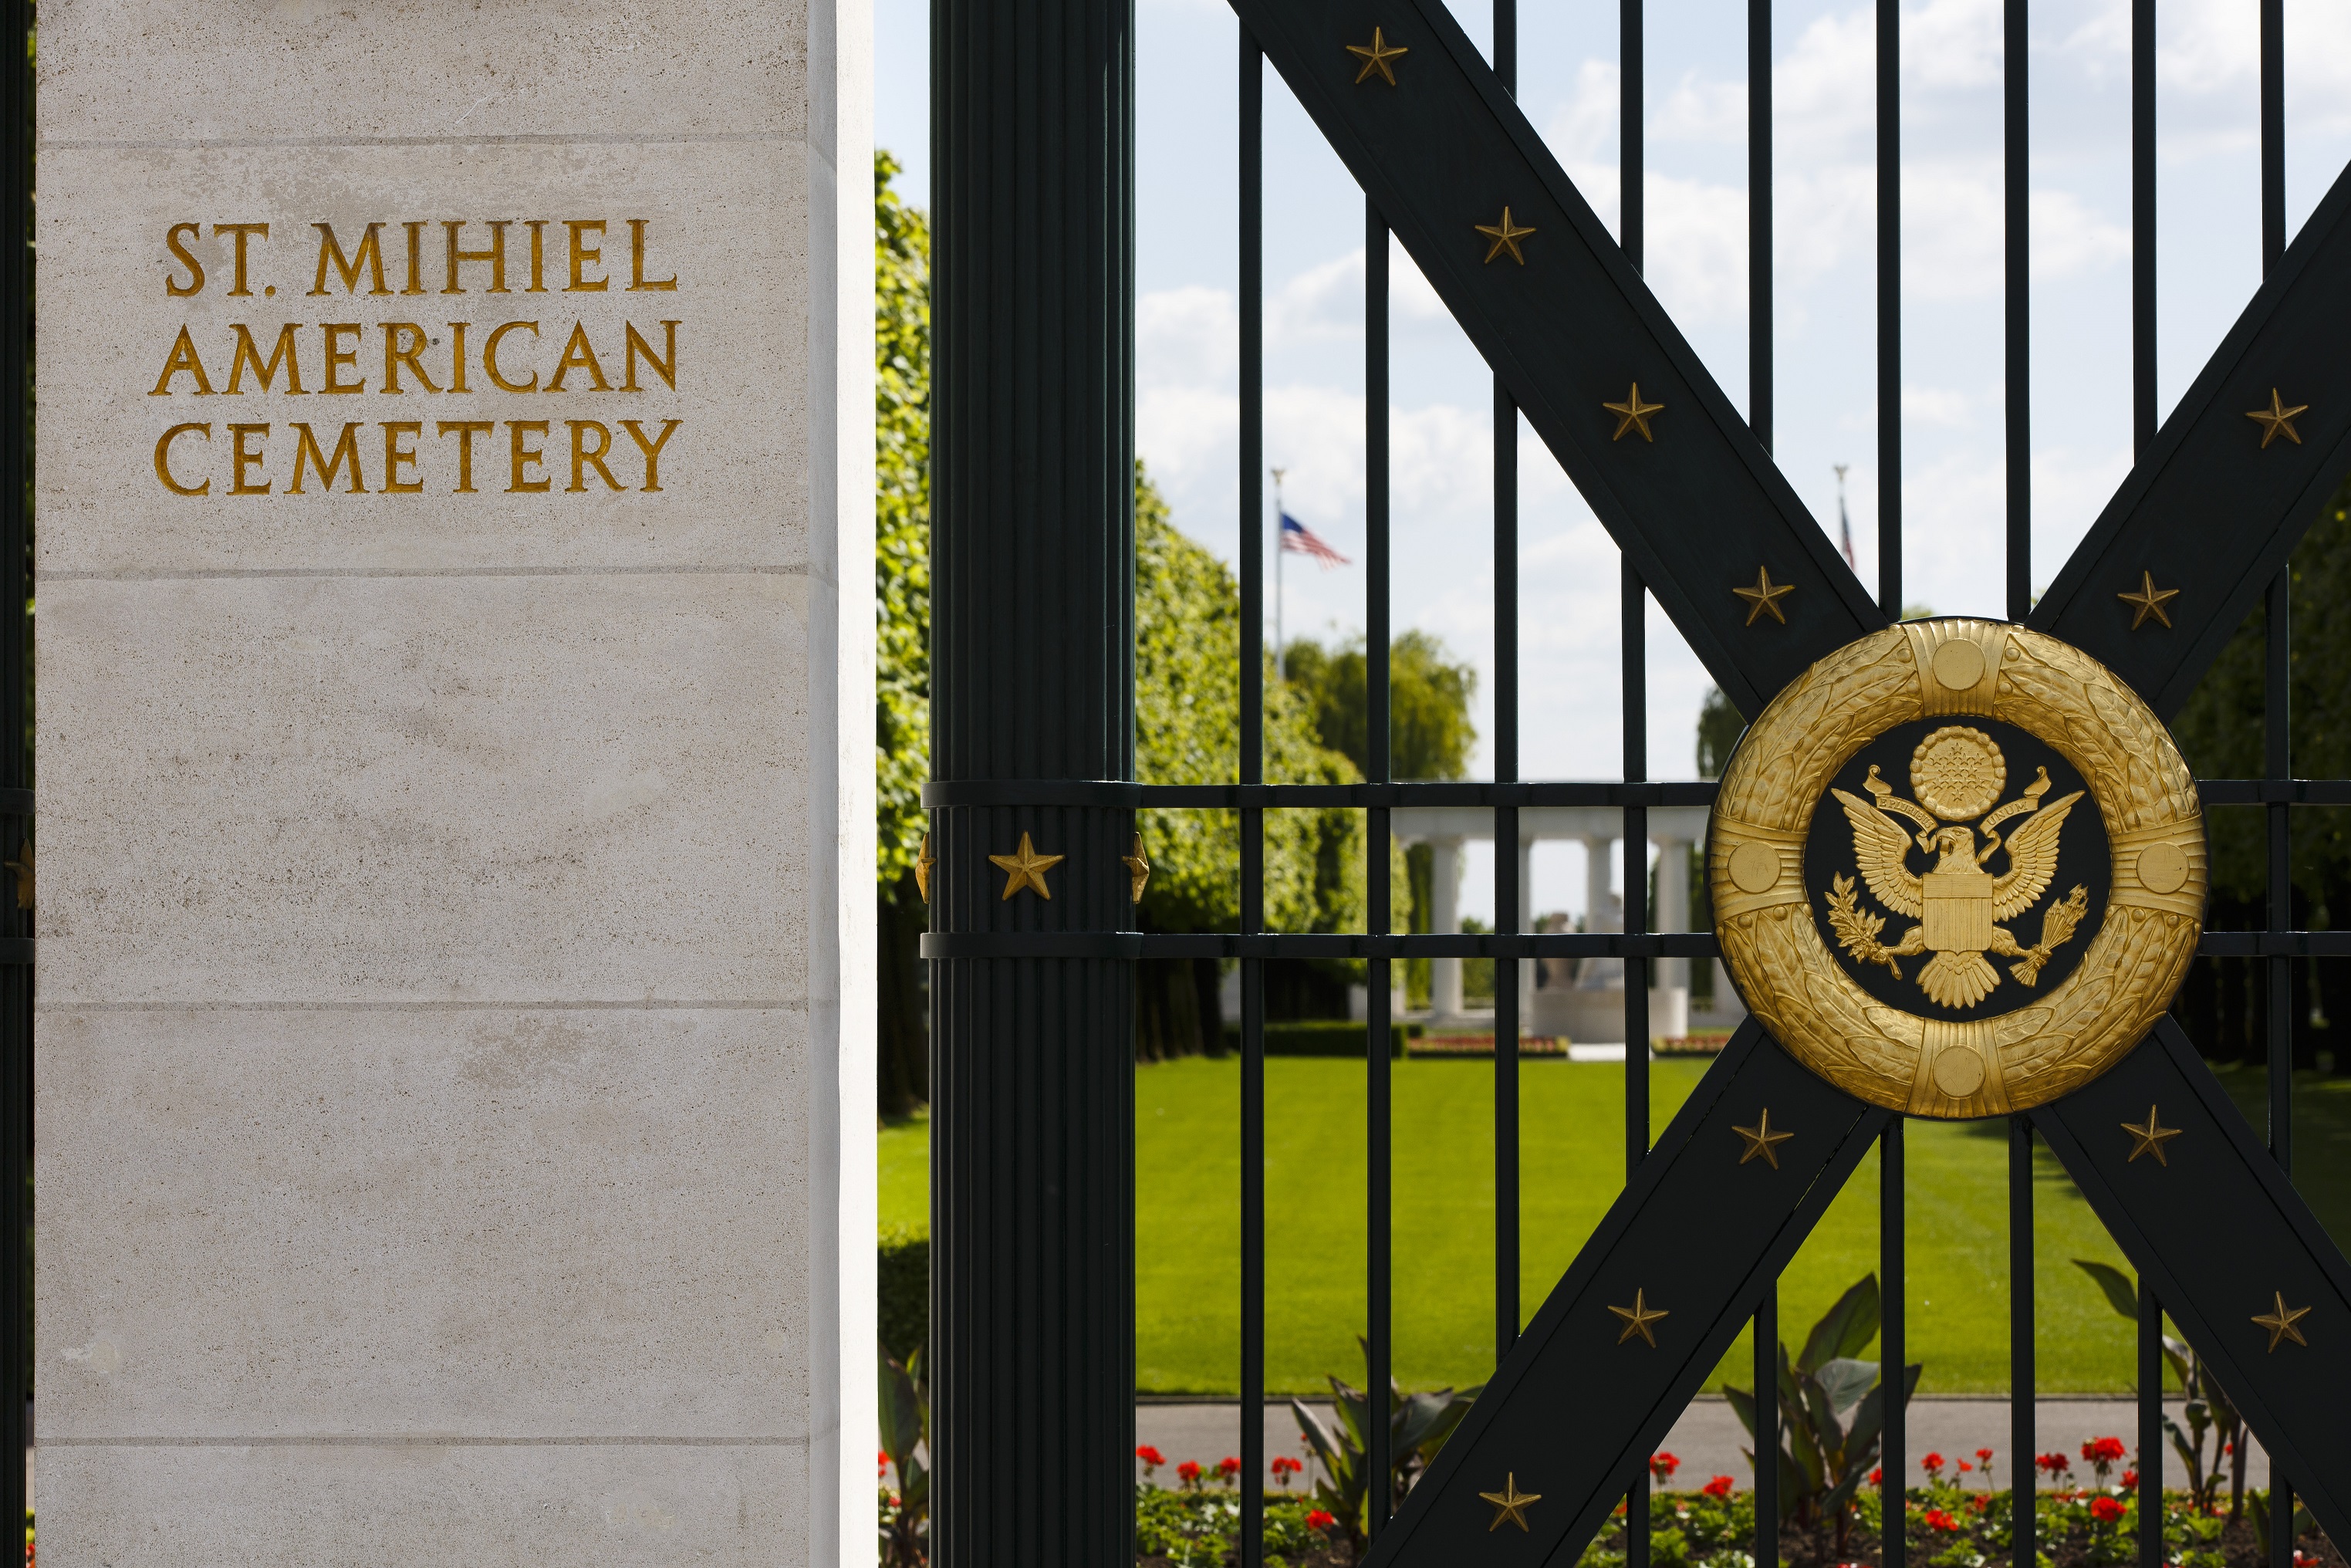 Entrance gate at St. Mihiel American Cemetery